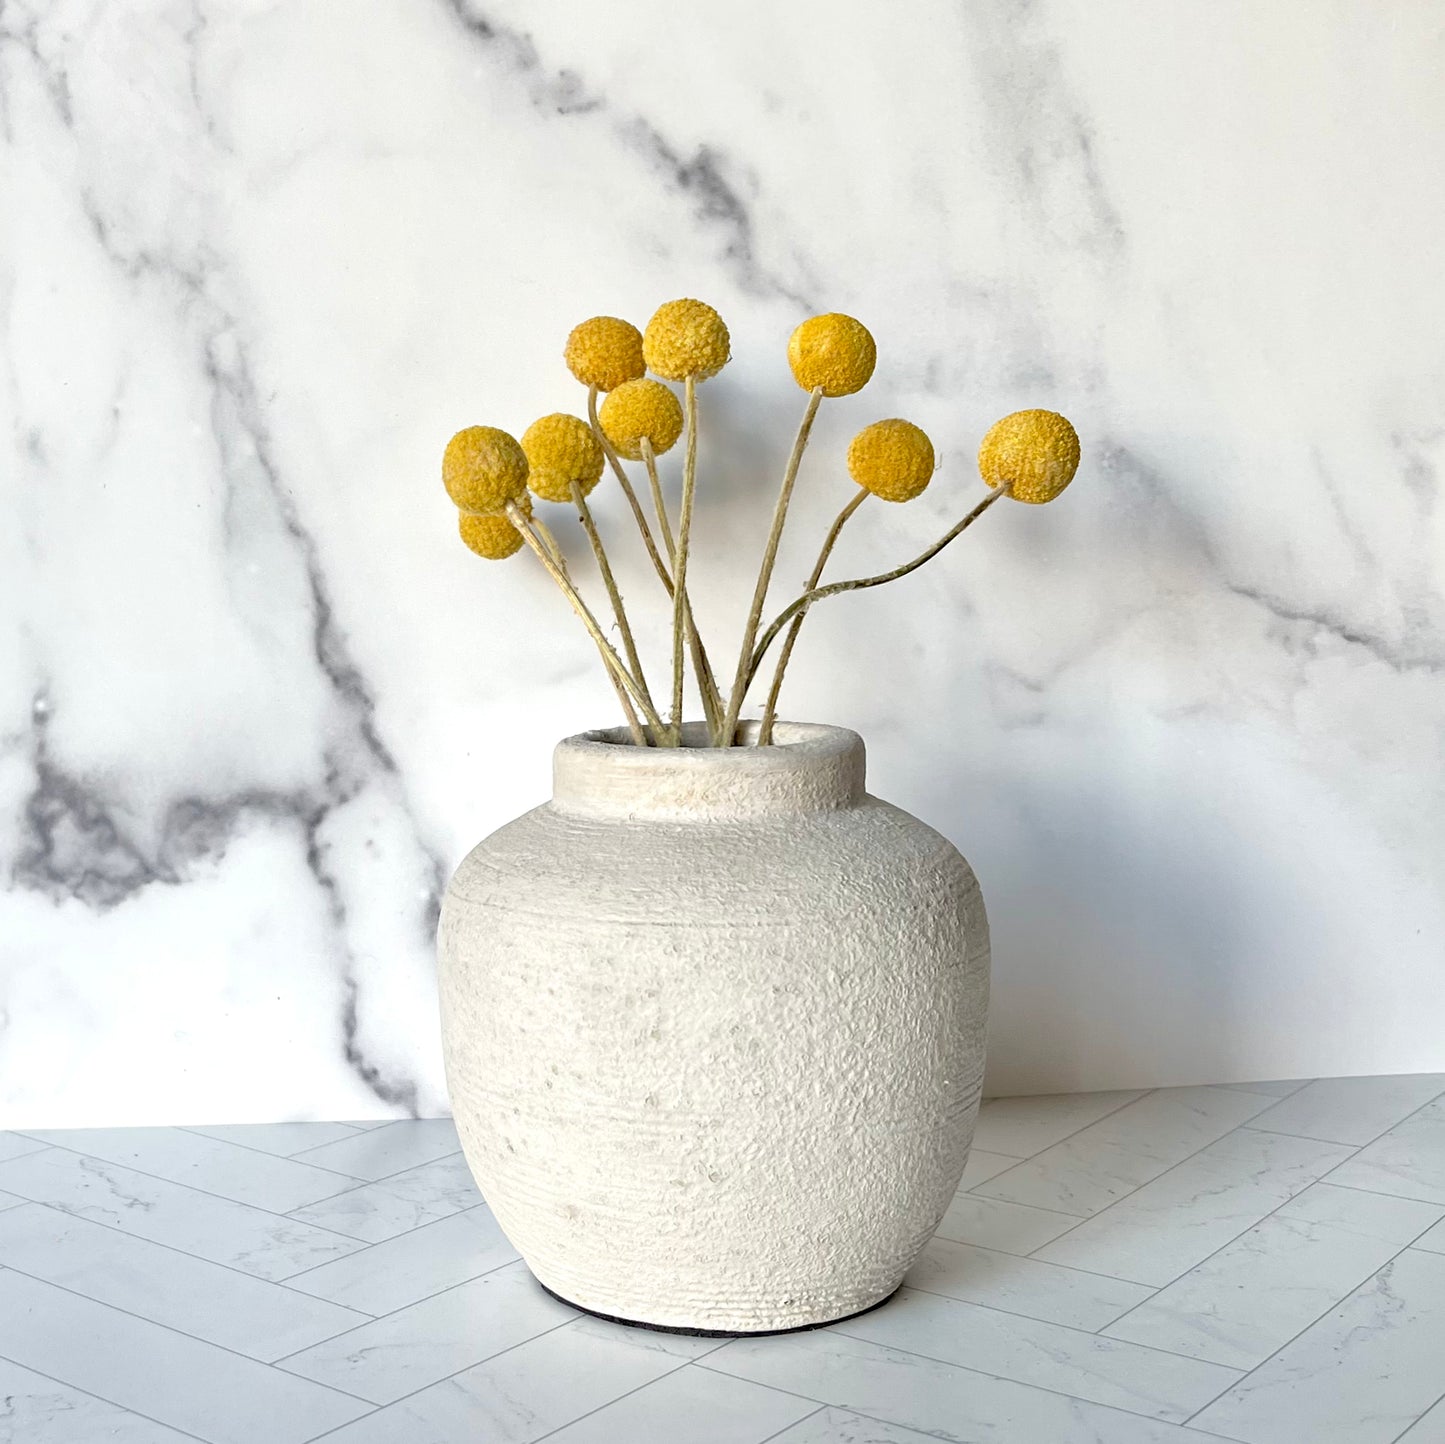 A small light gray vase filled with yellow dried billy button flowers against a white marble wall